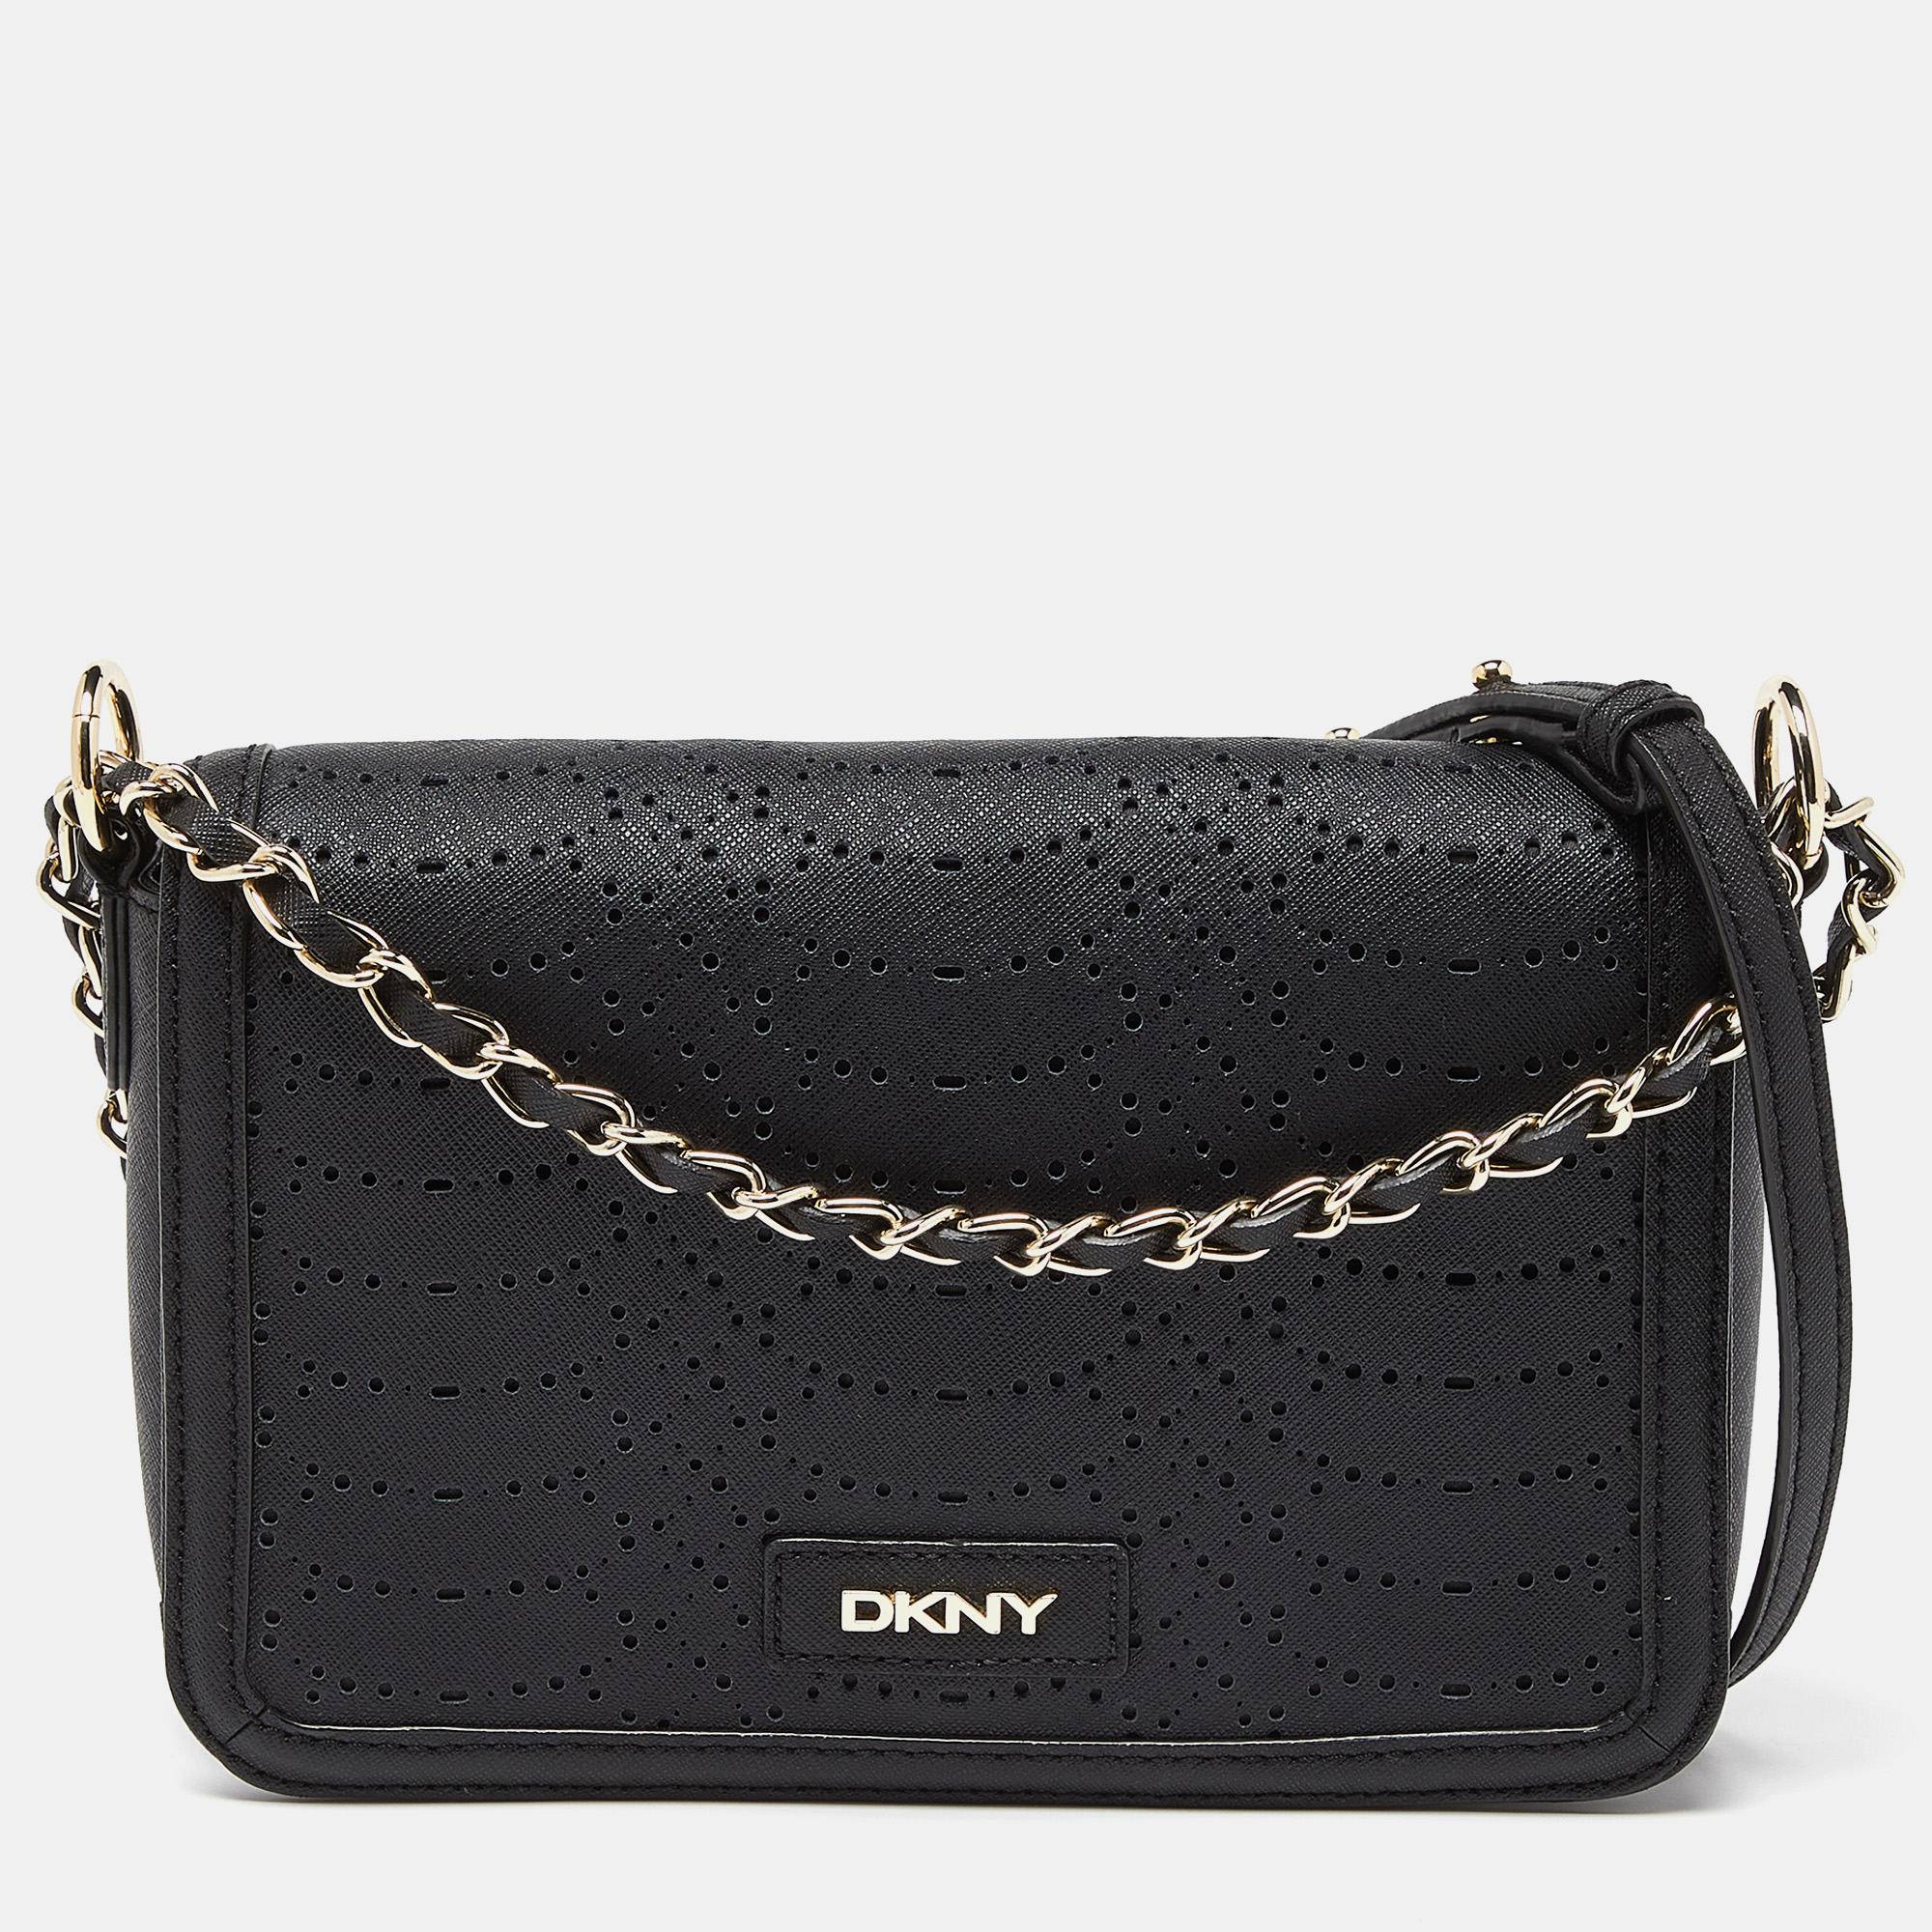 Marked by flawless craftsmanship and enduring appeal this DKNY bag is bound to be a versatile and durable accessory. It has a spacious size.